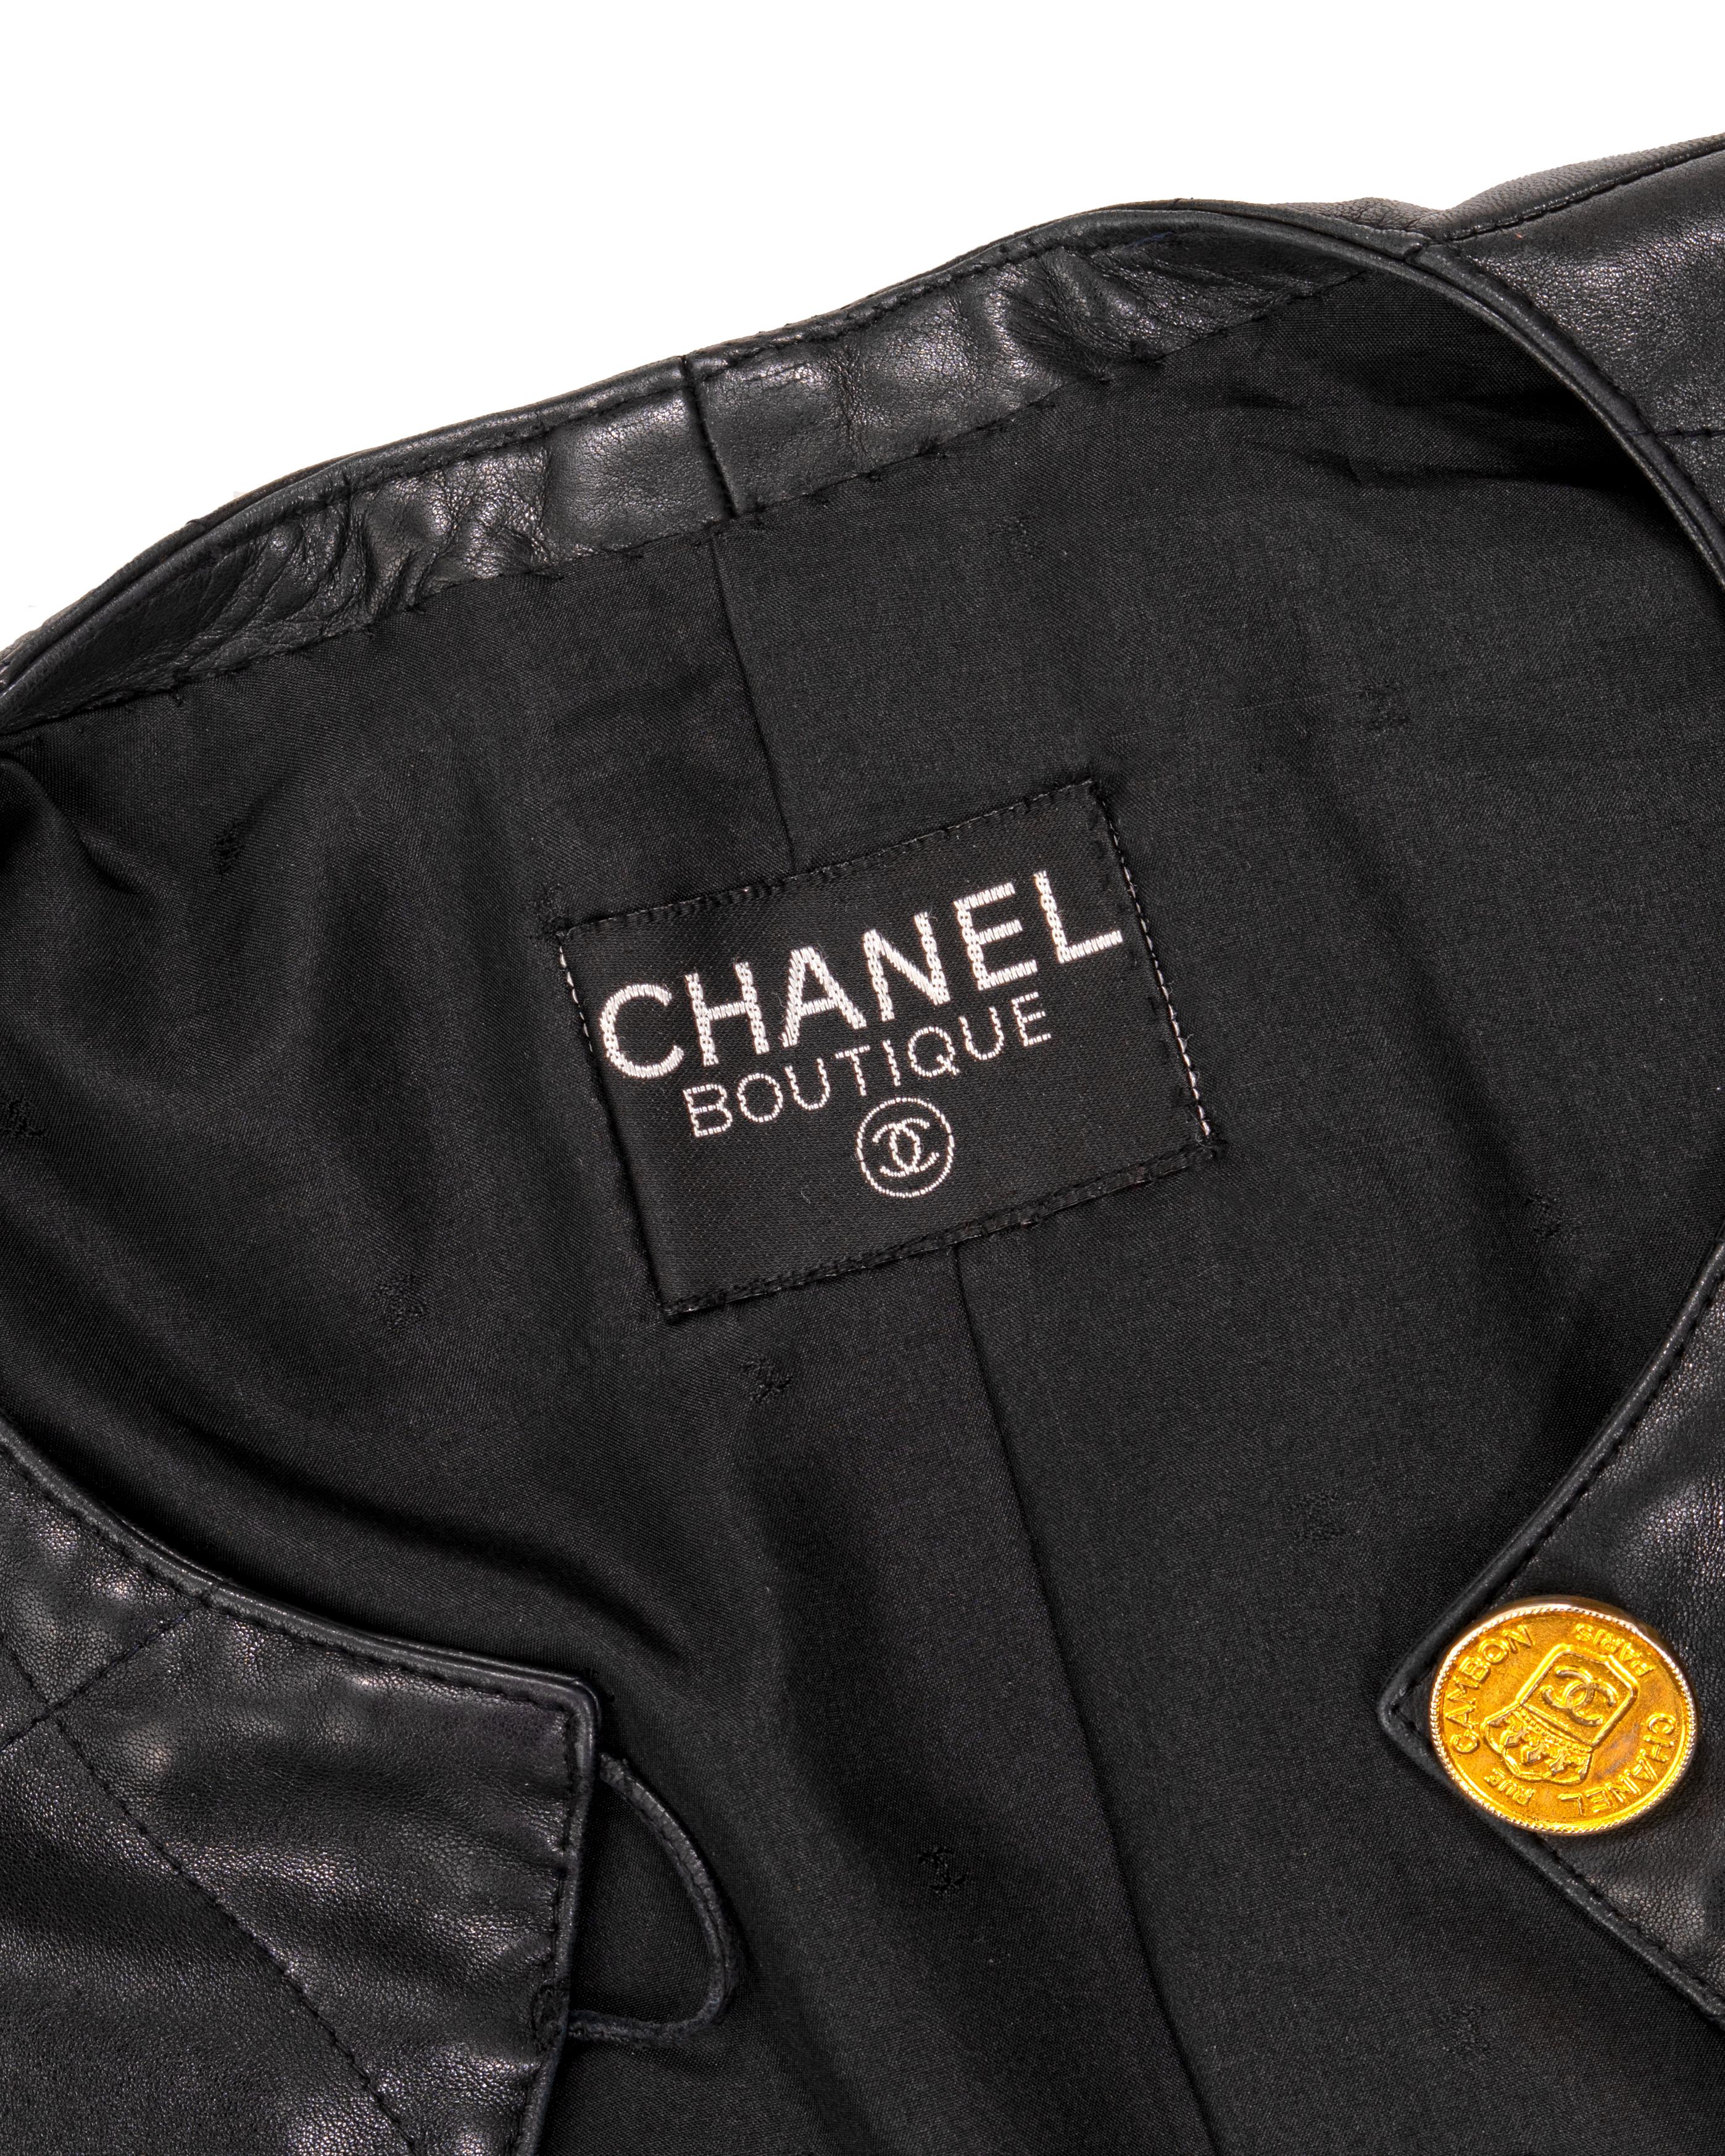 Chanel by Karl Lagerfeld black quilted lambskin leather jacket, fw 1987 8